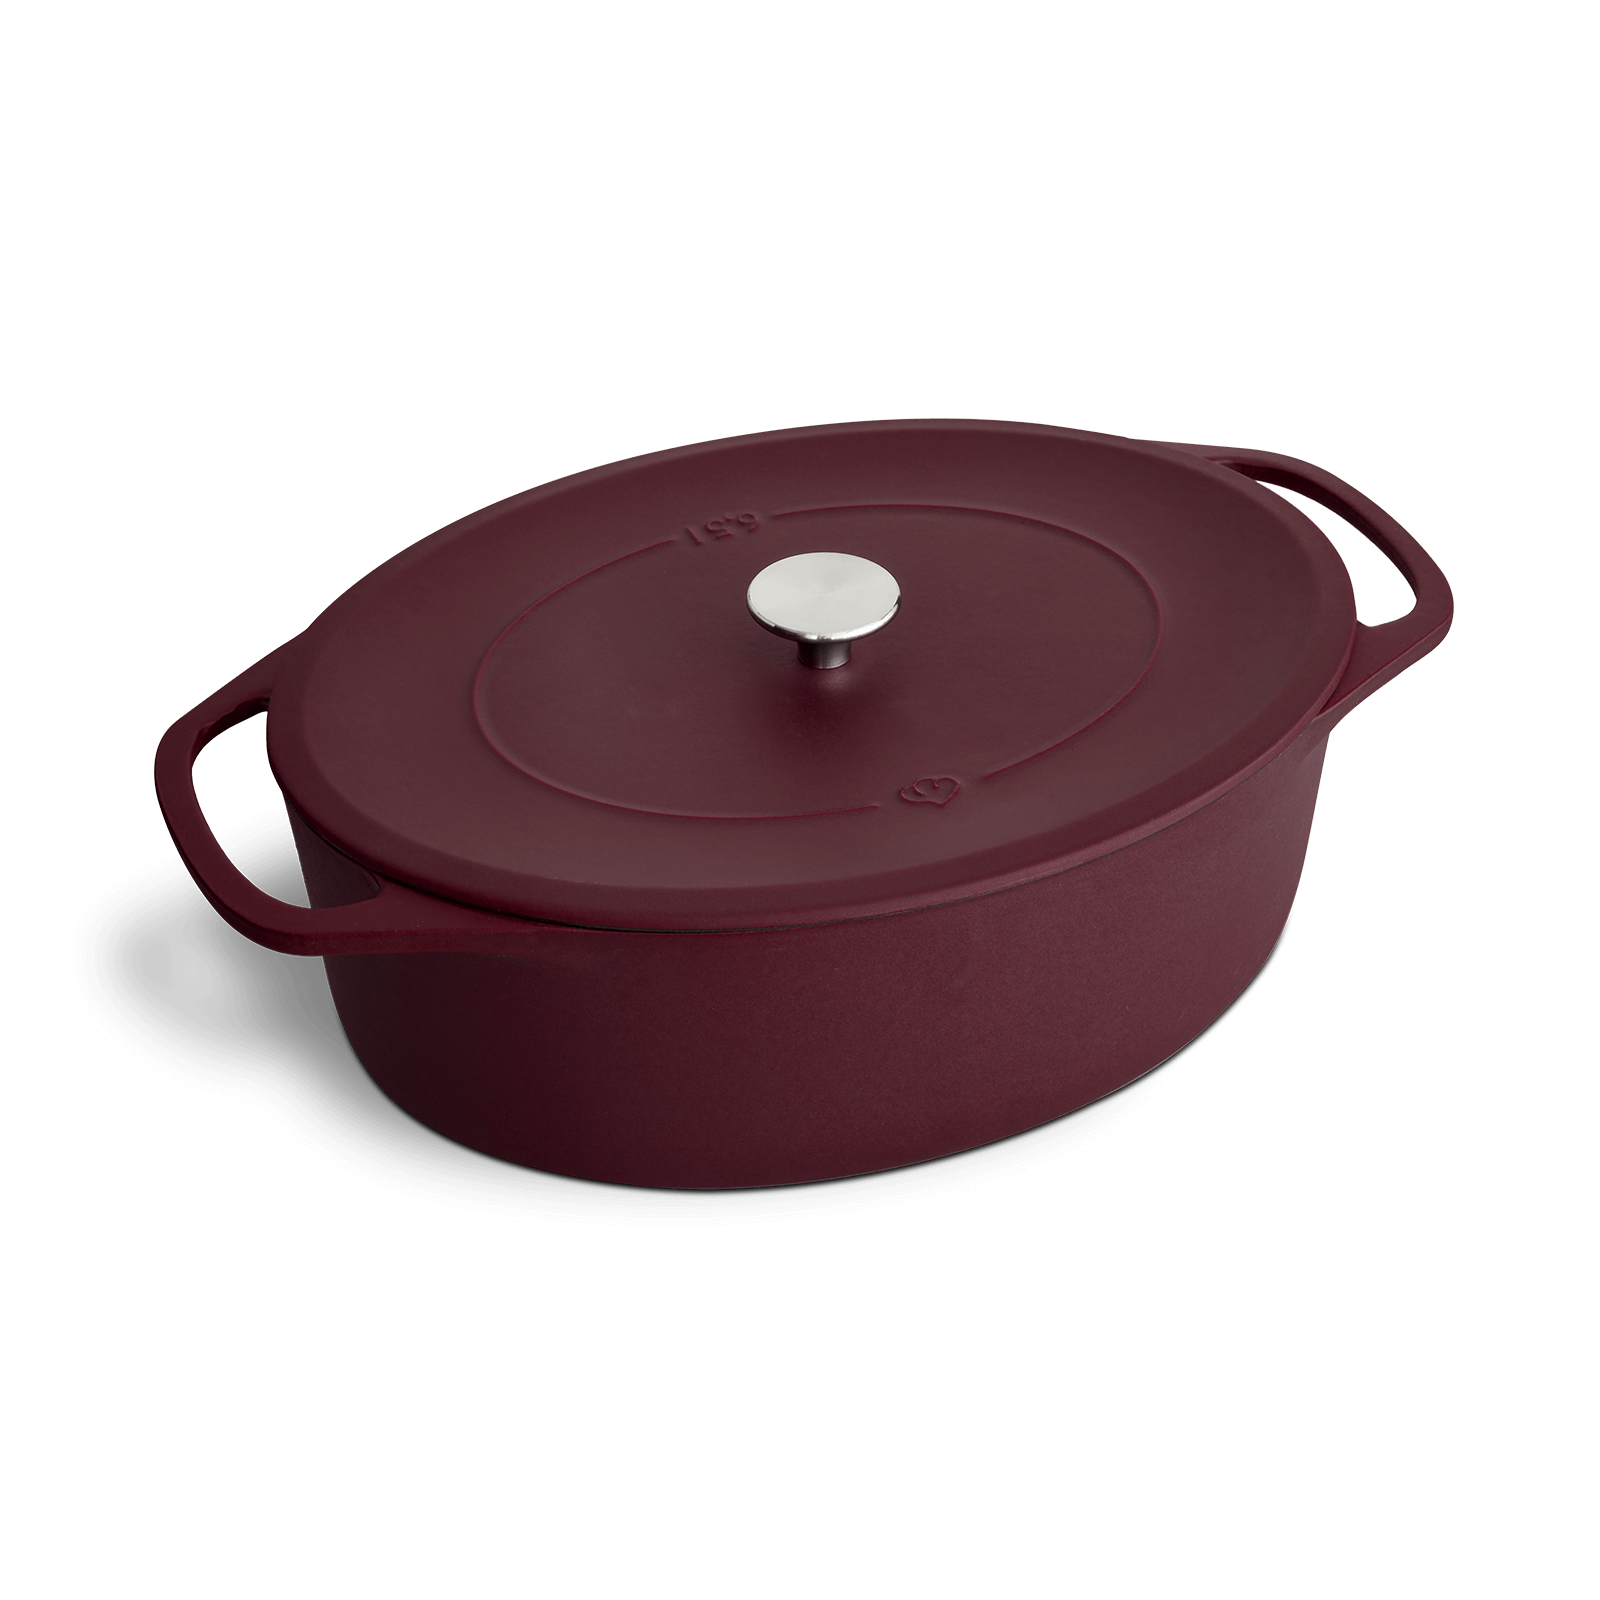 Cocotte Ruby Earth oval 33 cm - 6,5 Liter